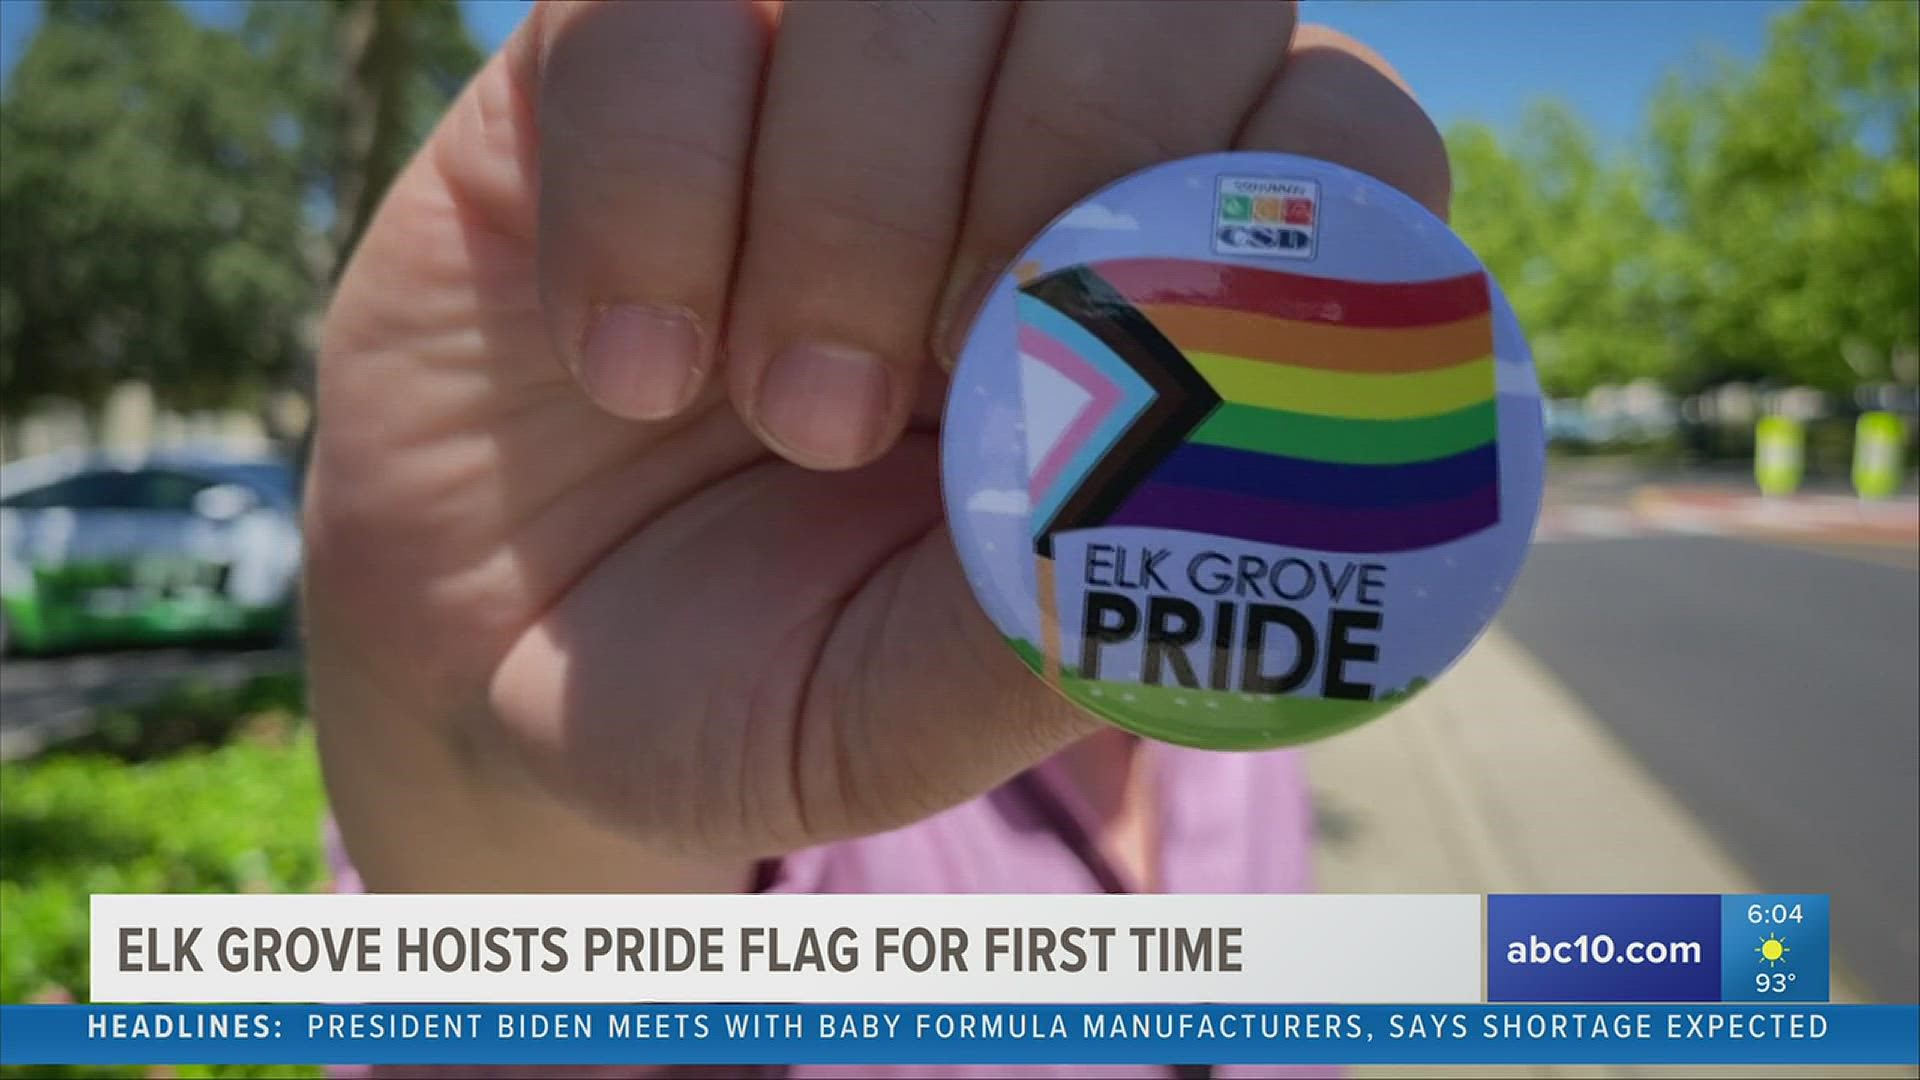 Elk Grove, for the first time, raised the Progress Pride flag as Pride month kicks off.